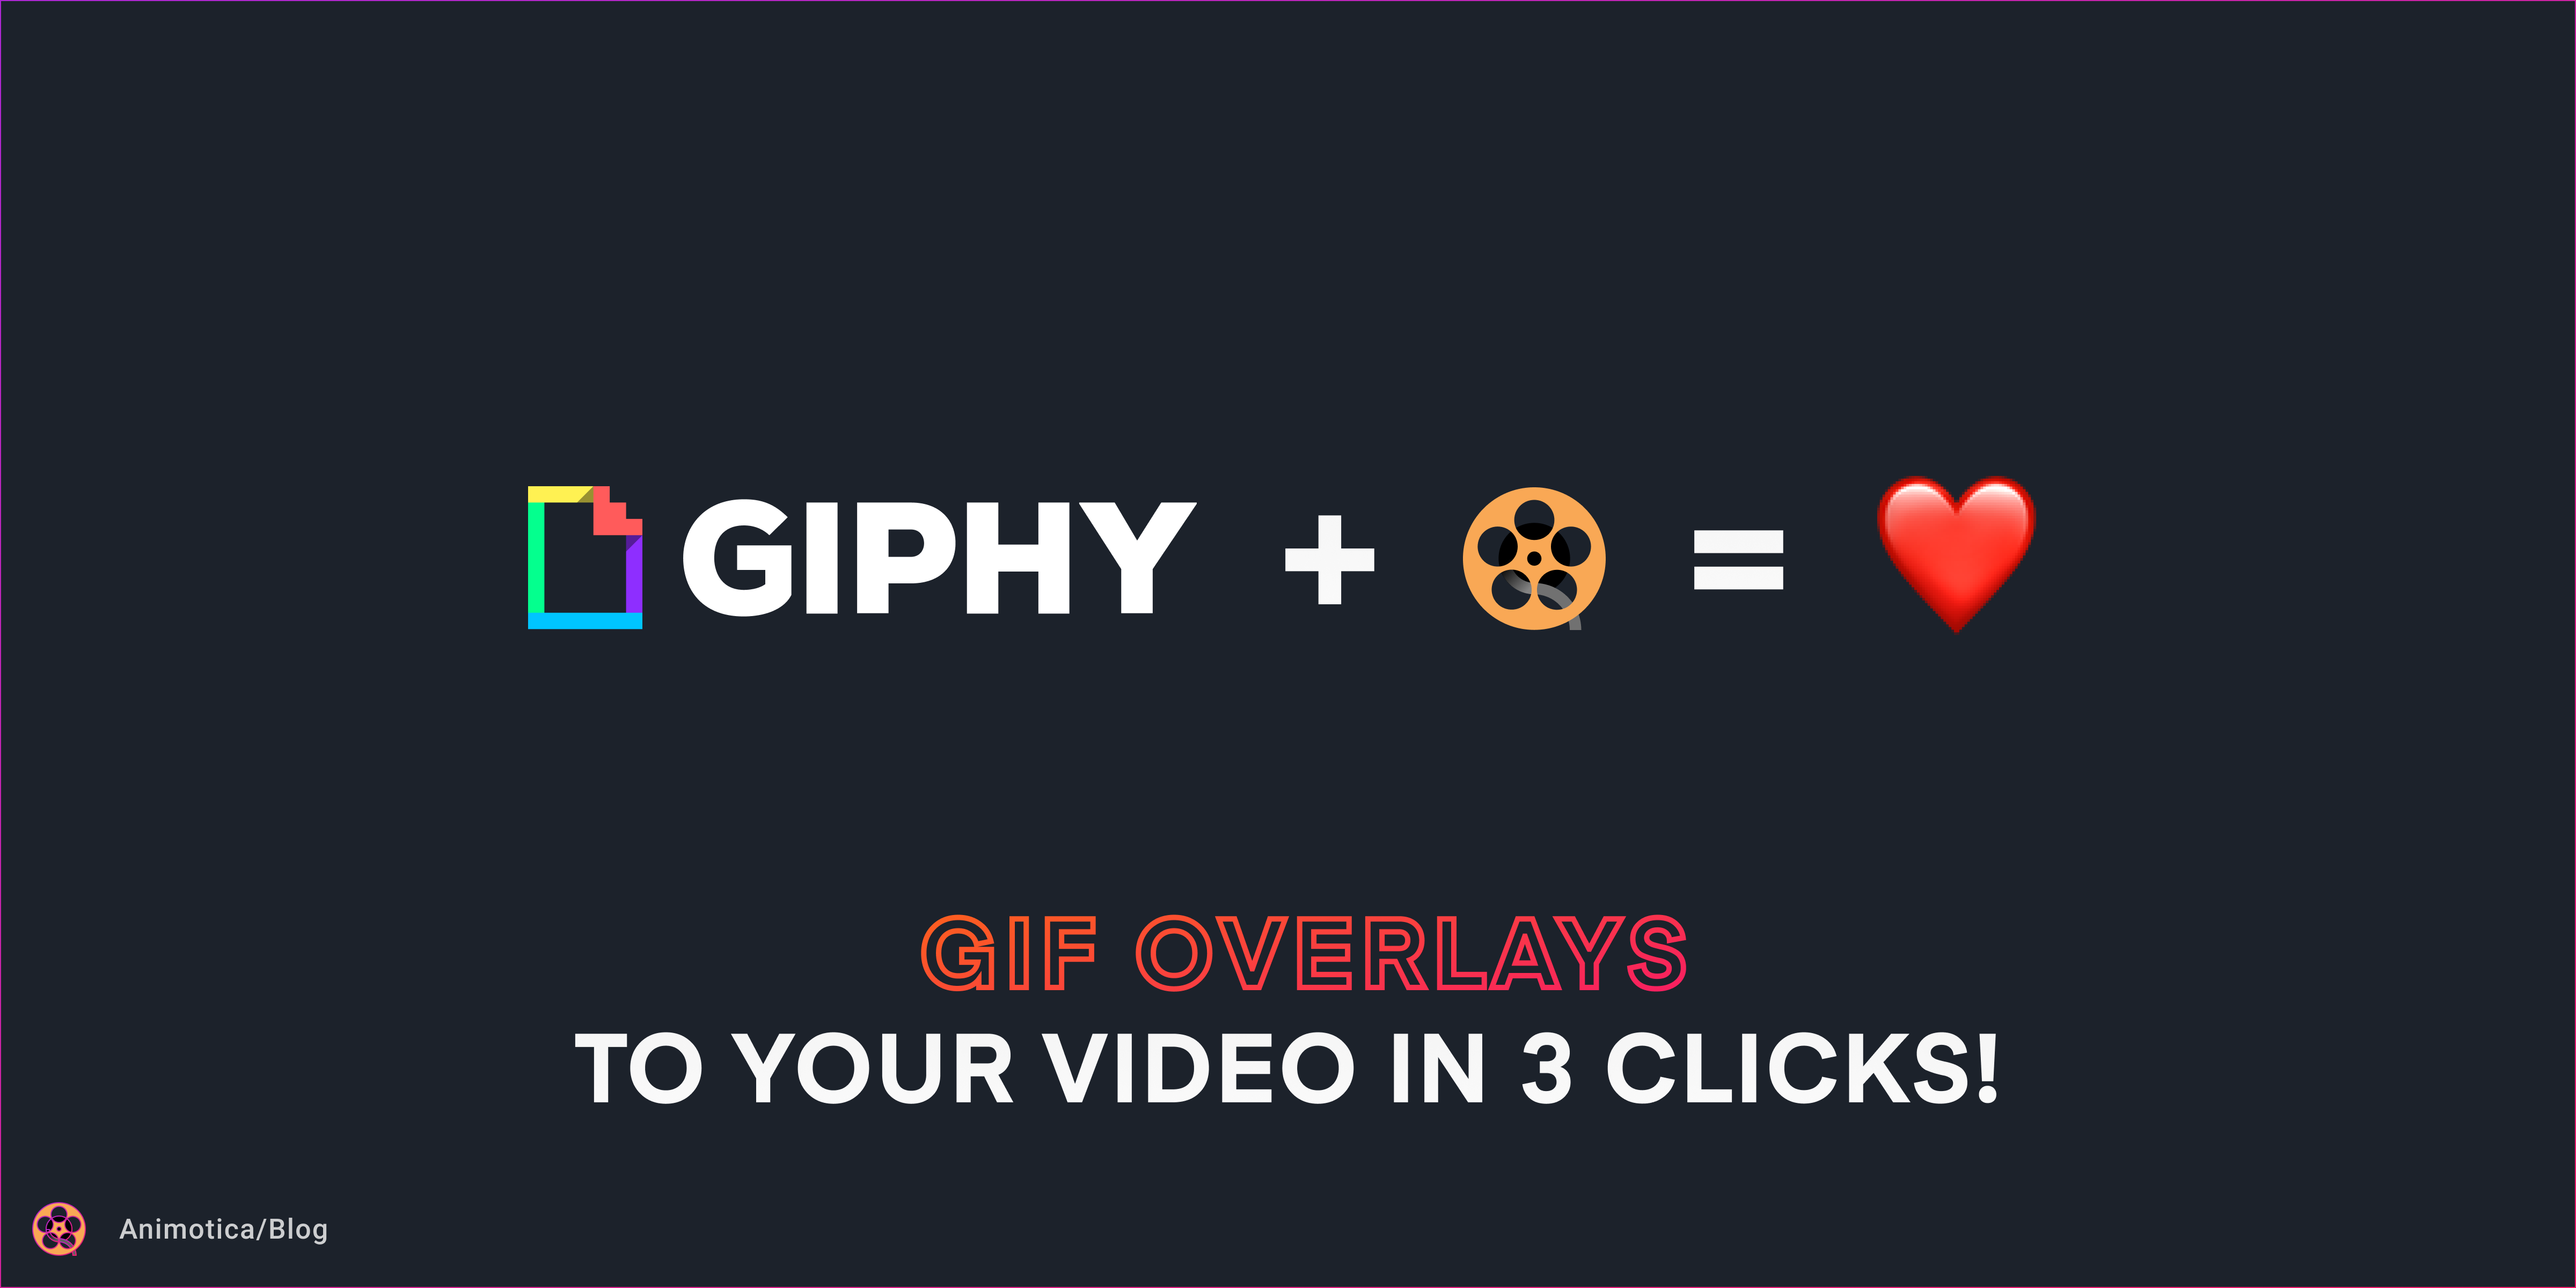 How to add GIFs to videos